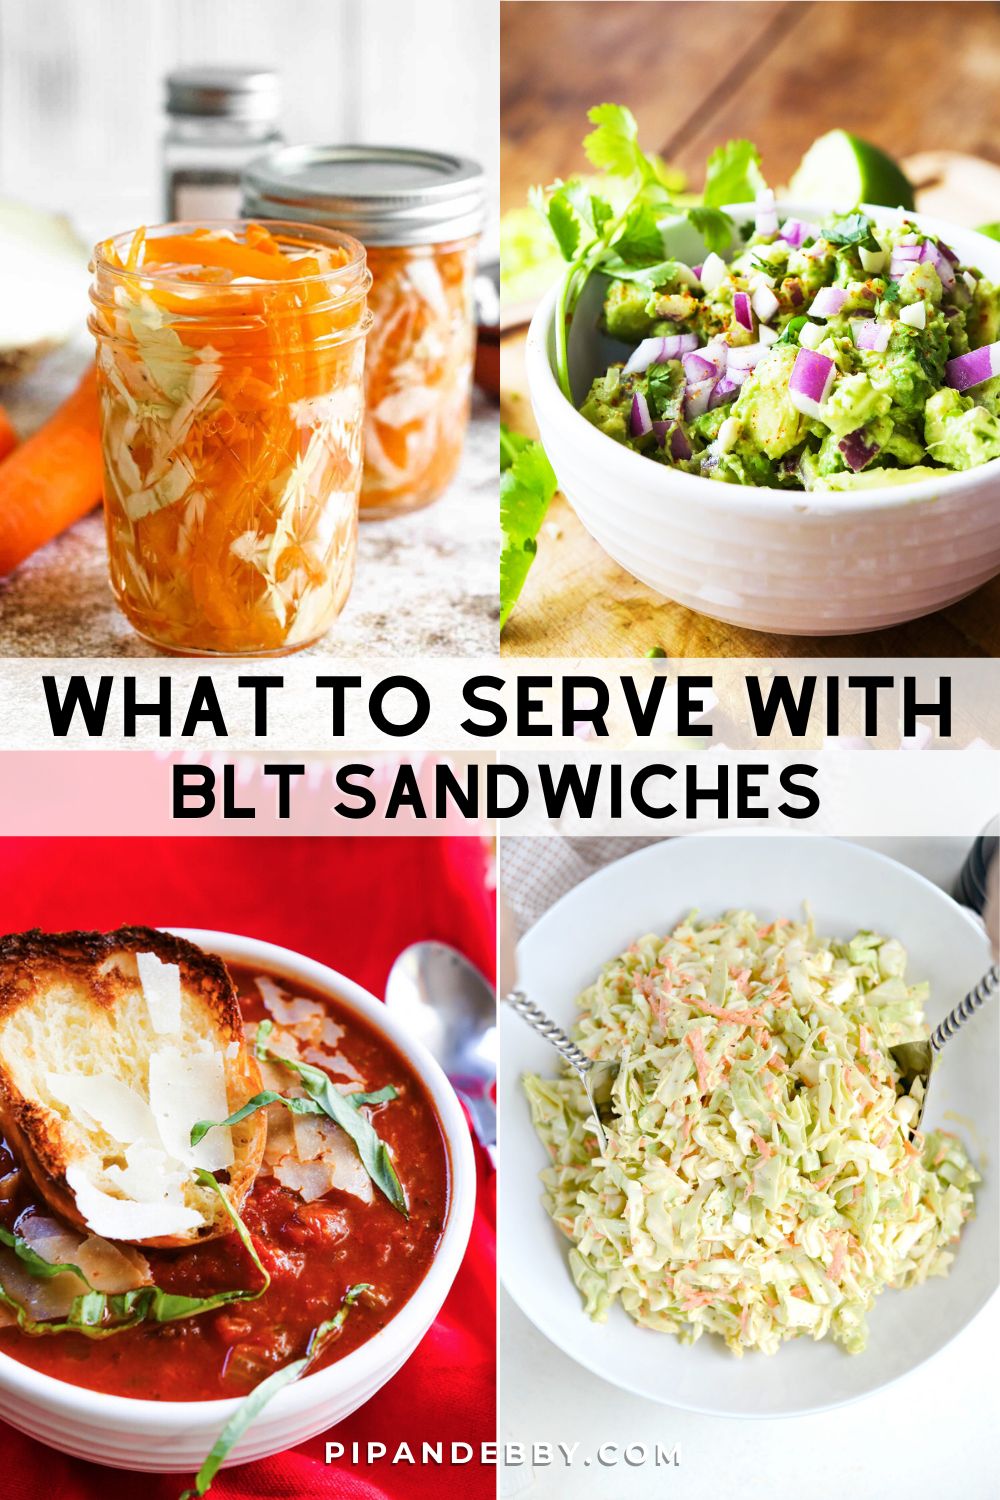 Four food photos in a grid with text overlay reading, "What to serve with BLT sandwiches."